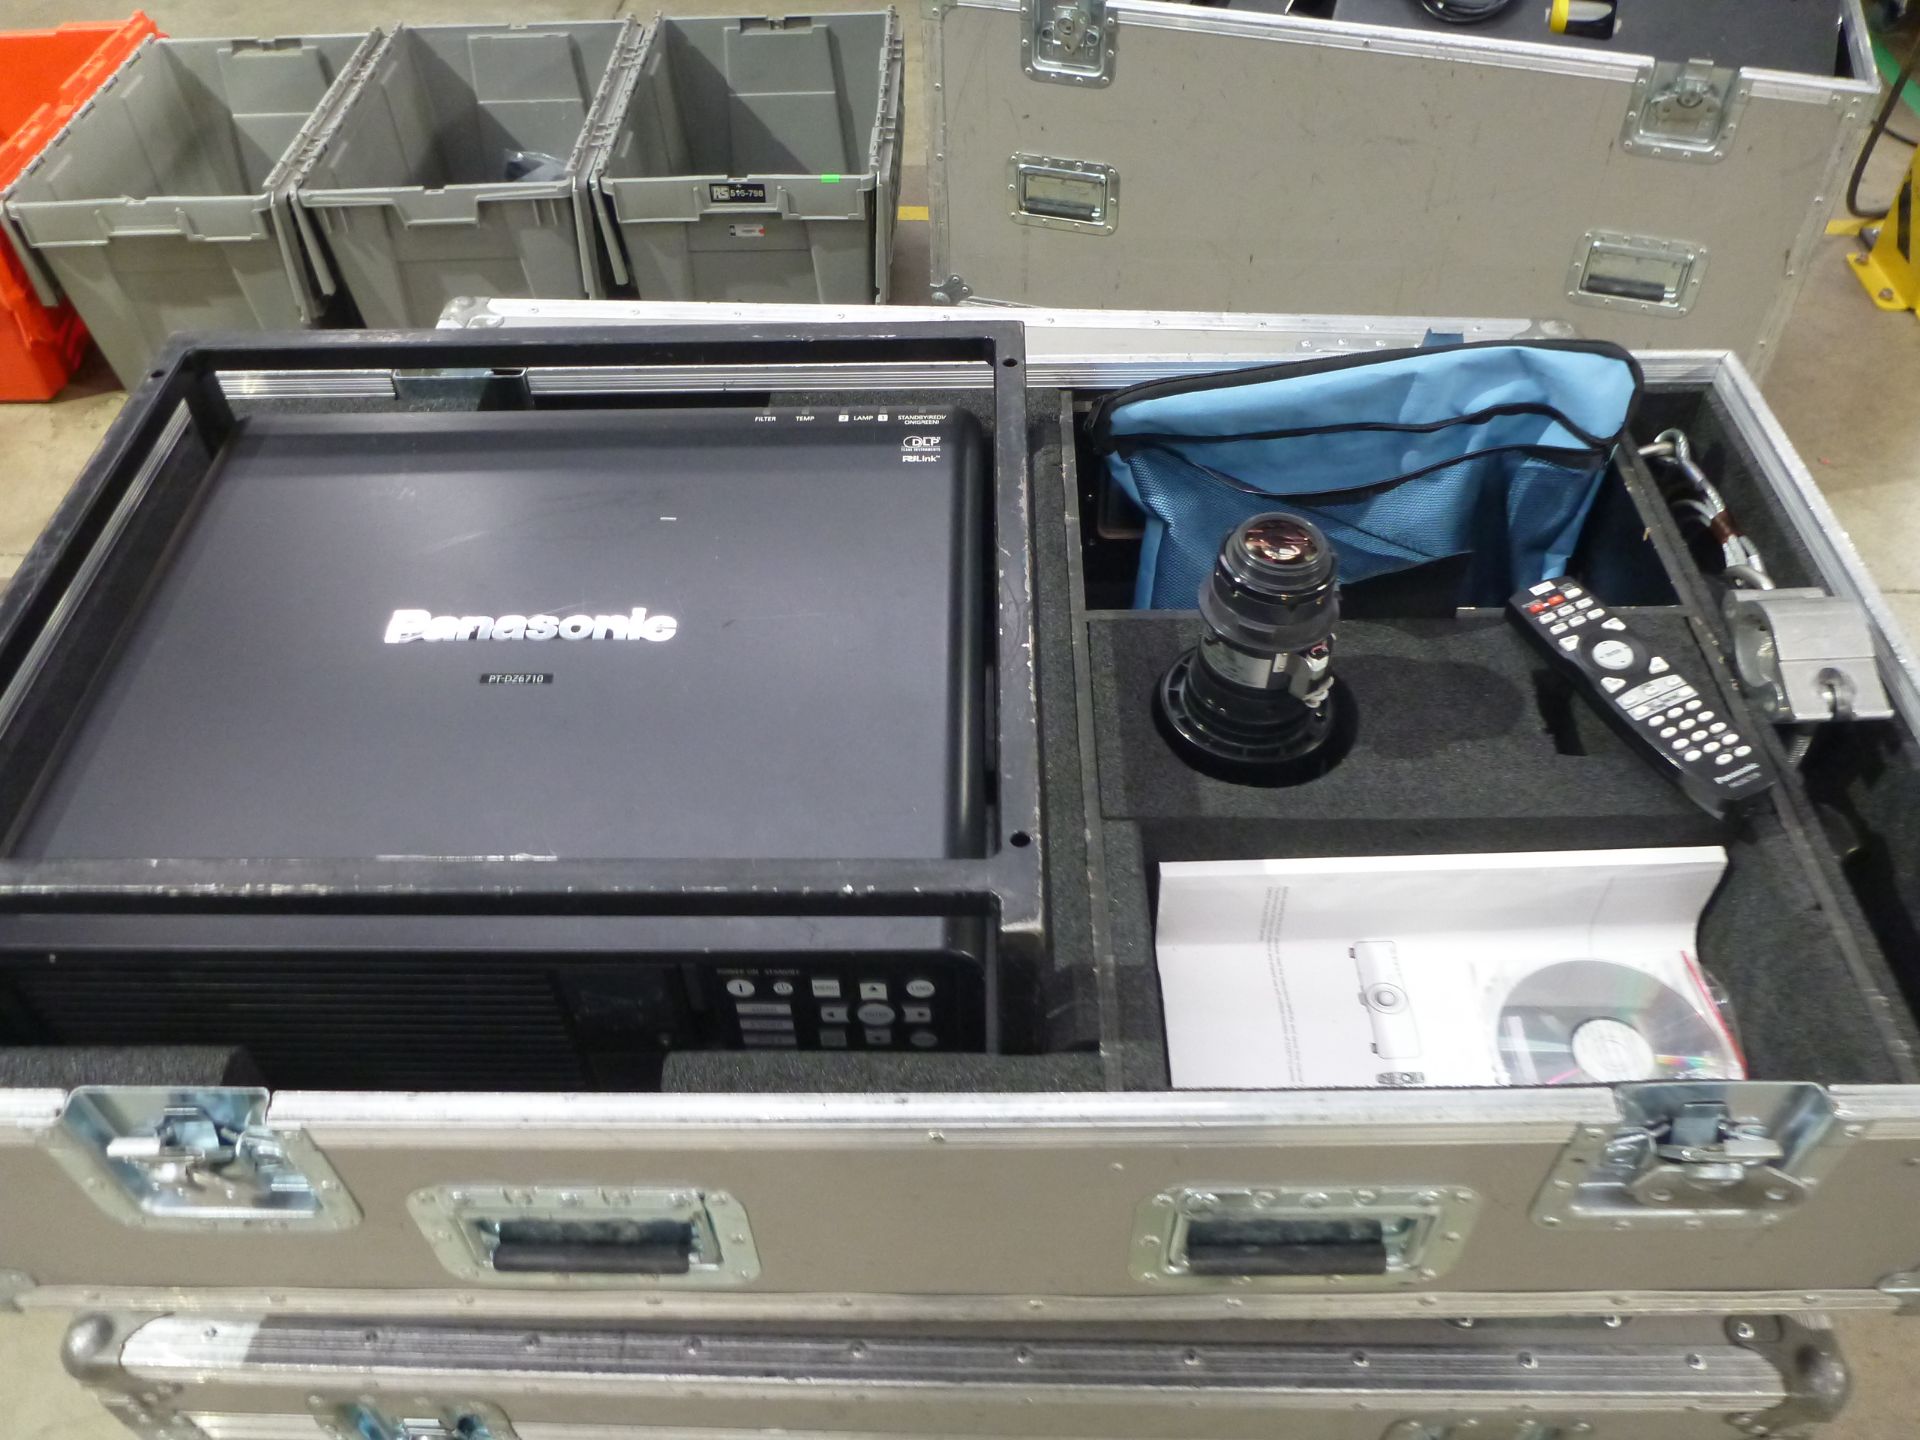 Panasonic Projector, Model PT-DZ6710E, S/N SH0150015, YOM 2010, In flight case with standard 1.3-1. - Image 12 of 13